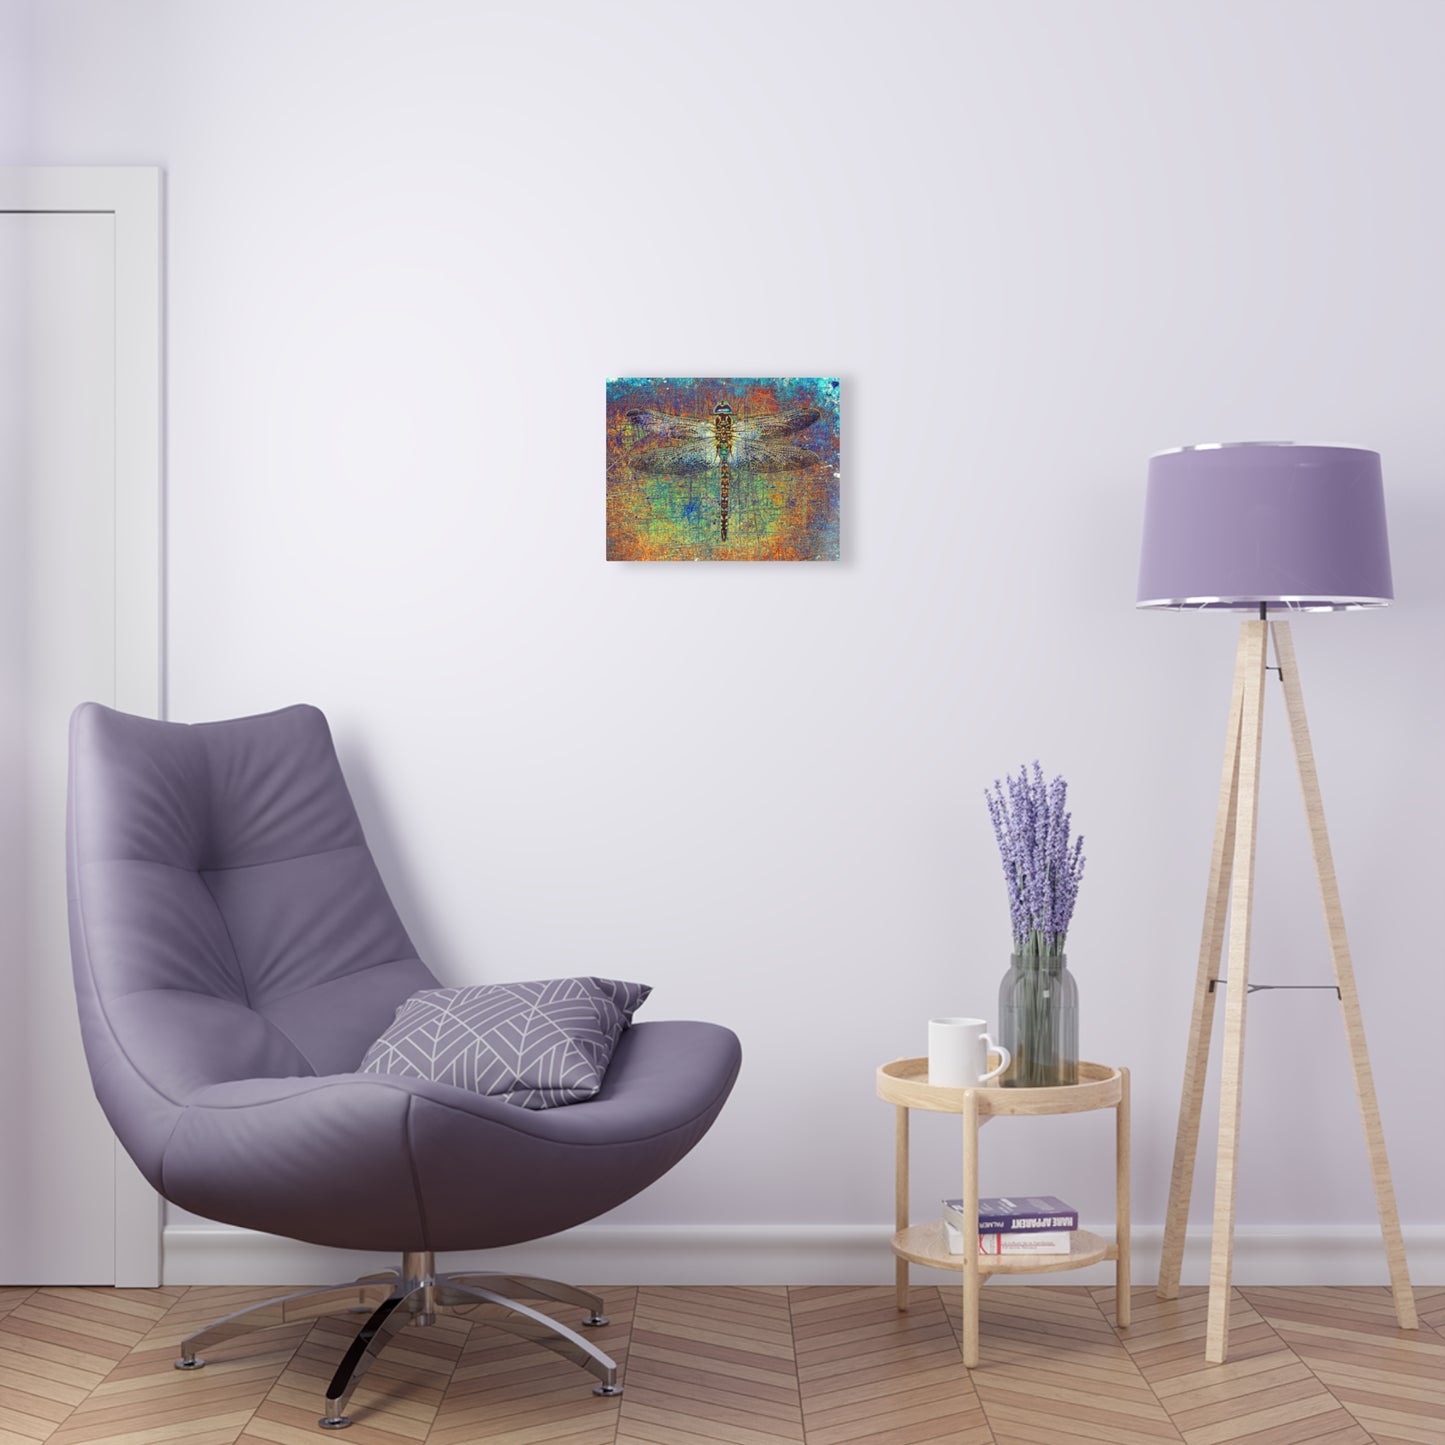 Dragonfly Themed Plexiglass Wall Art - Dragonfly on Multicolor Background Printed on a Crystal Clear Acrylic Panel